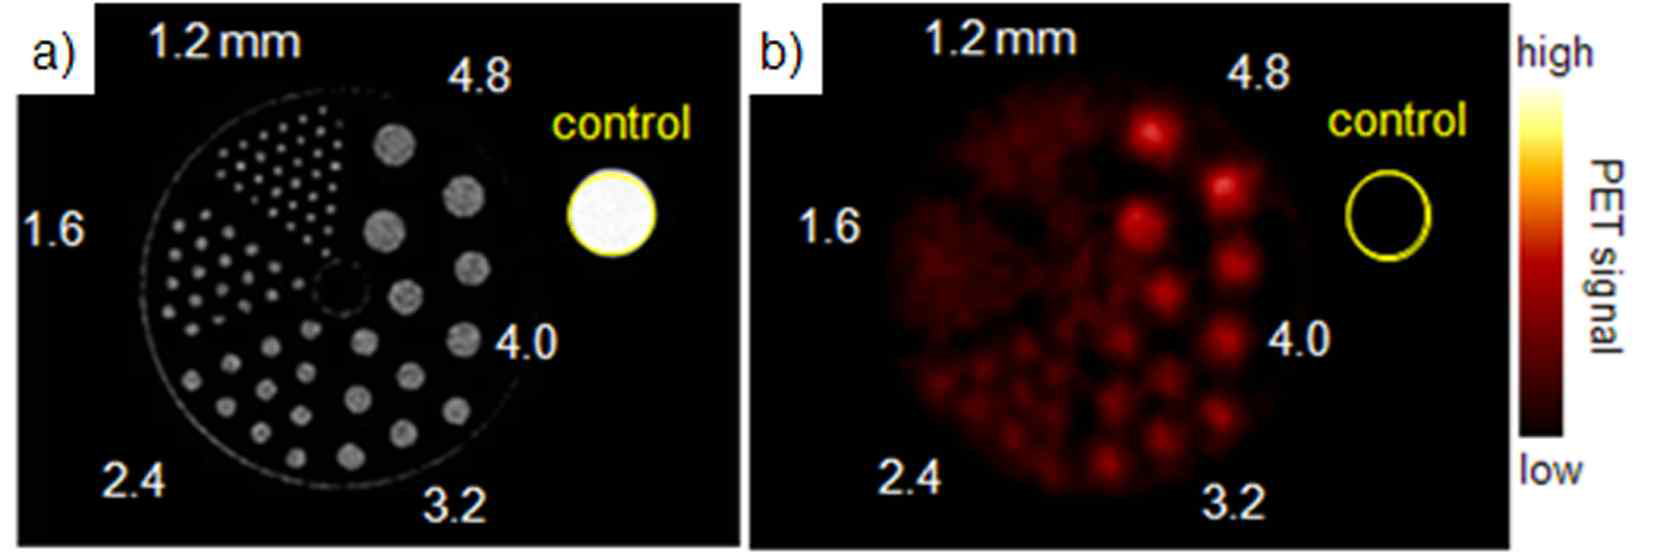 Spatial resolution comparison between (a) MRI and (b) PET techniques using Derenzo phantom (circle diameters of 1.2, 1.6, 2.4, 3.2, 4.0, 4.8 mm) which contains contrast agents of 50 g/mL (Mn+Fe) of MnMEIO and 2.5 Ci/mL of 124I (yellow circle: water (control)).